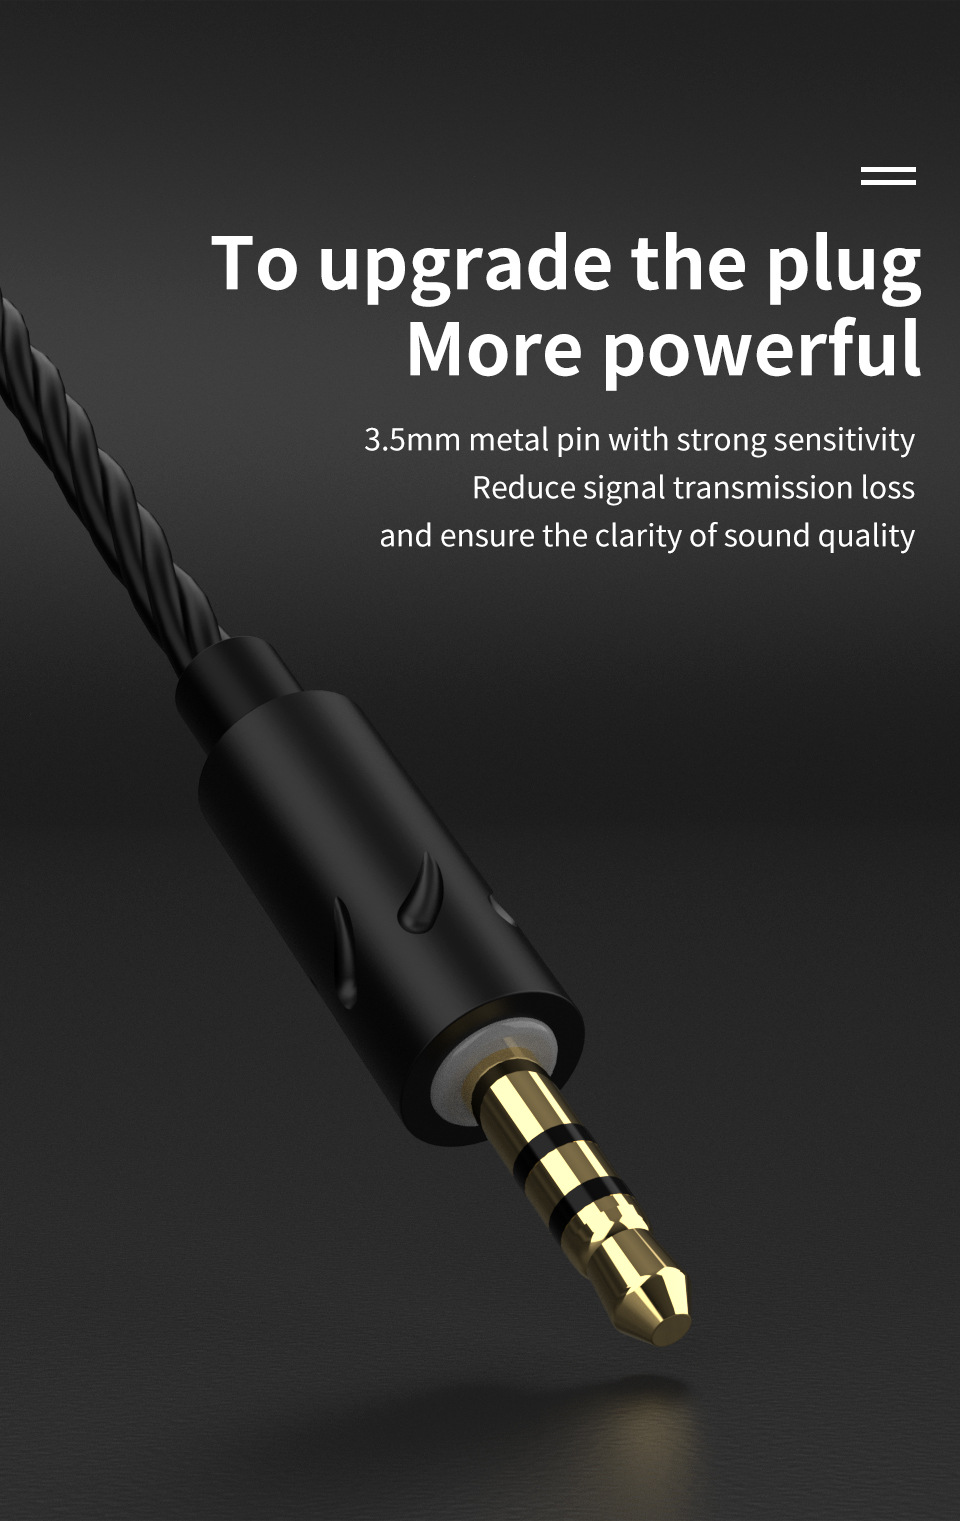 QKZ-AK6-MAX-Dynamic-In-Ear-Earphones-Monitor-Noise-Cancelling-Sport-Music-Headphones-with-Detachable-1930250-12